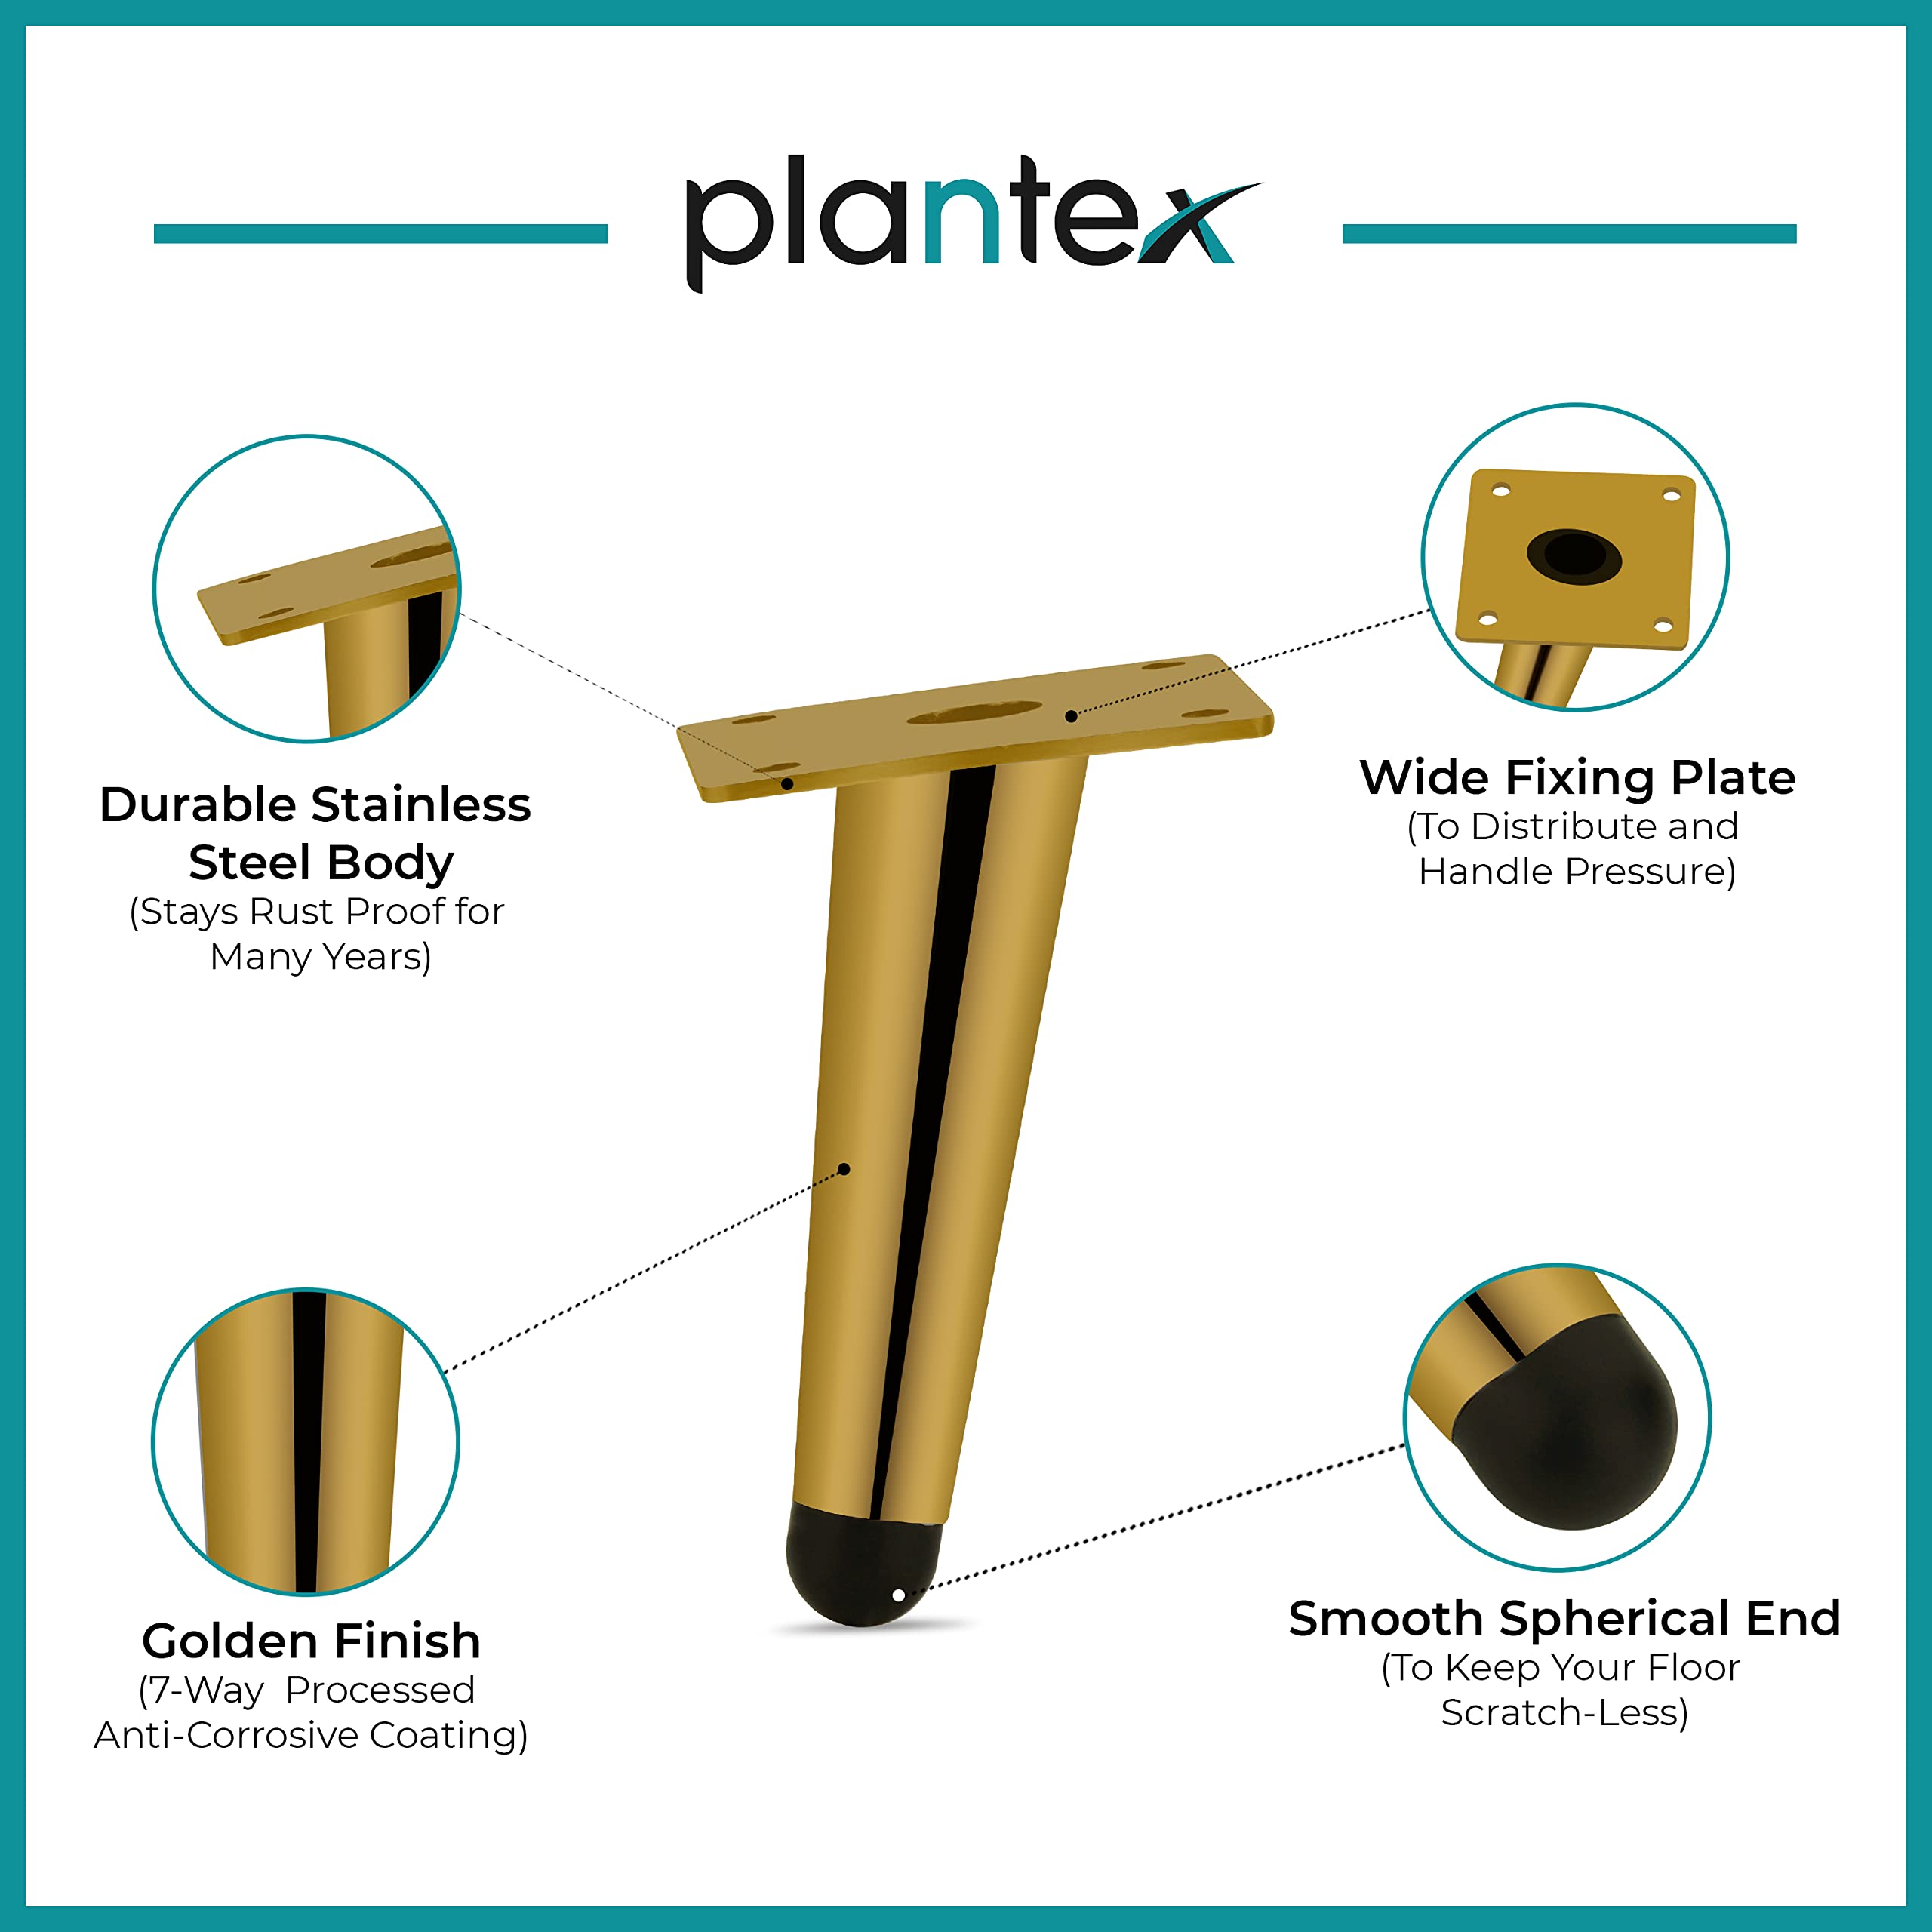 Plantex 304 Grade Stainless Steel 4 inch Sofa Leg/Bed Furniture Leg Pair for Home Furnitures (DTS-54-Gold) – 10 Pcs